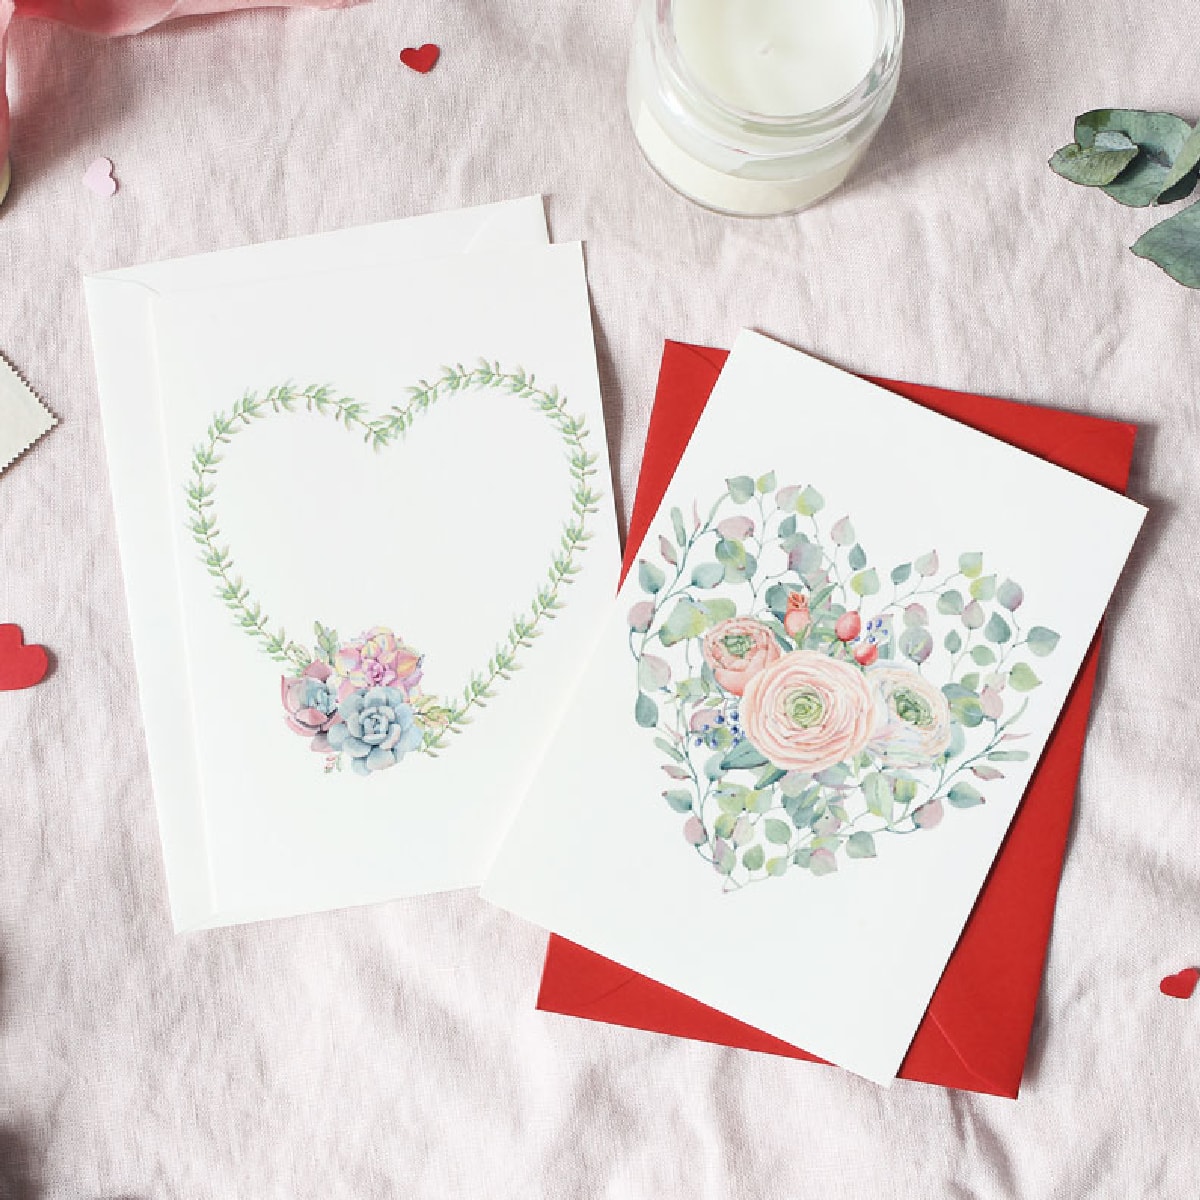 heart cards on linen surface with ribbon red hearts and candle